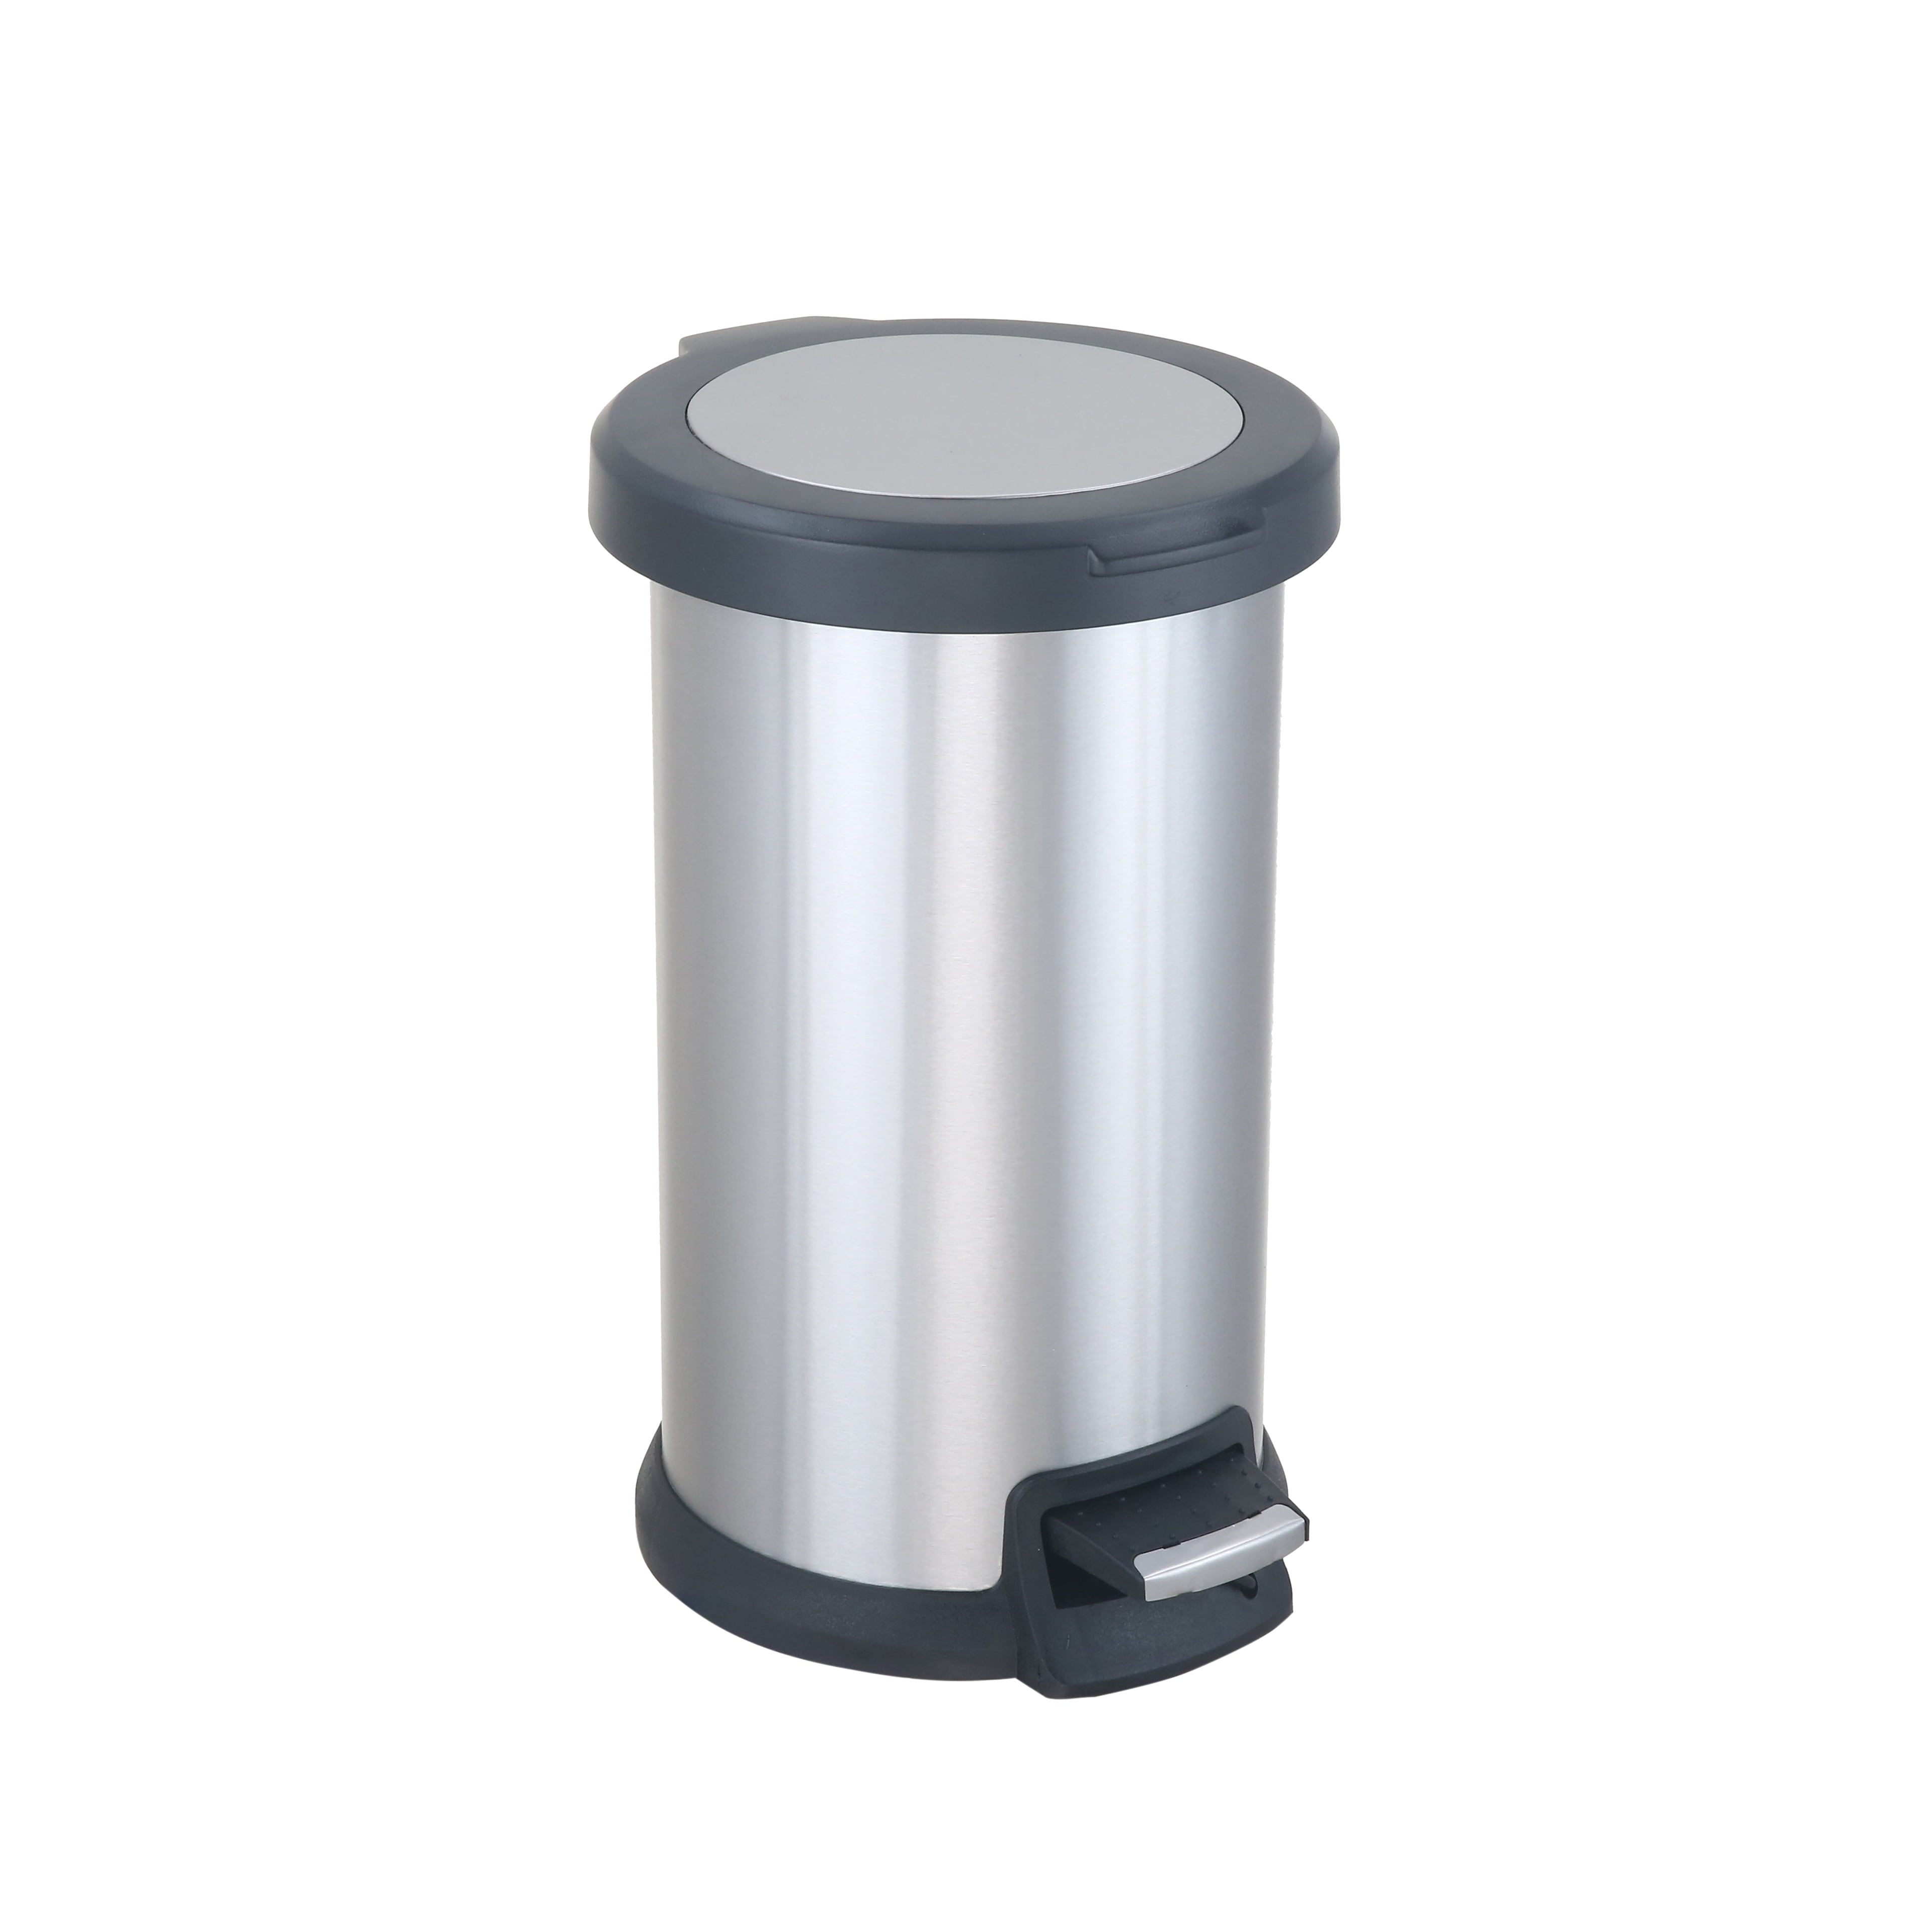 Stainless Steel 12 Liter 3.1 Gallon Soft-Close Trash Can with Foot Pedal 